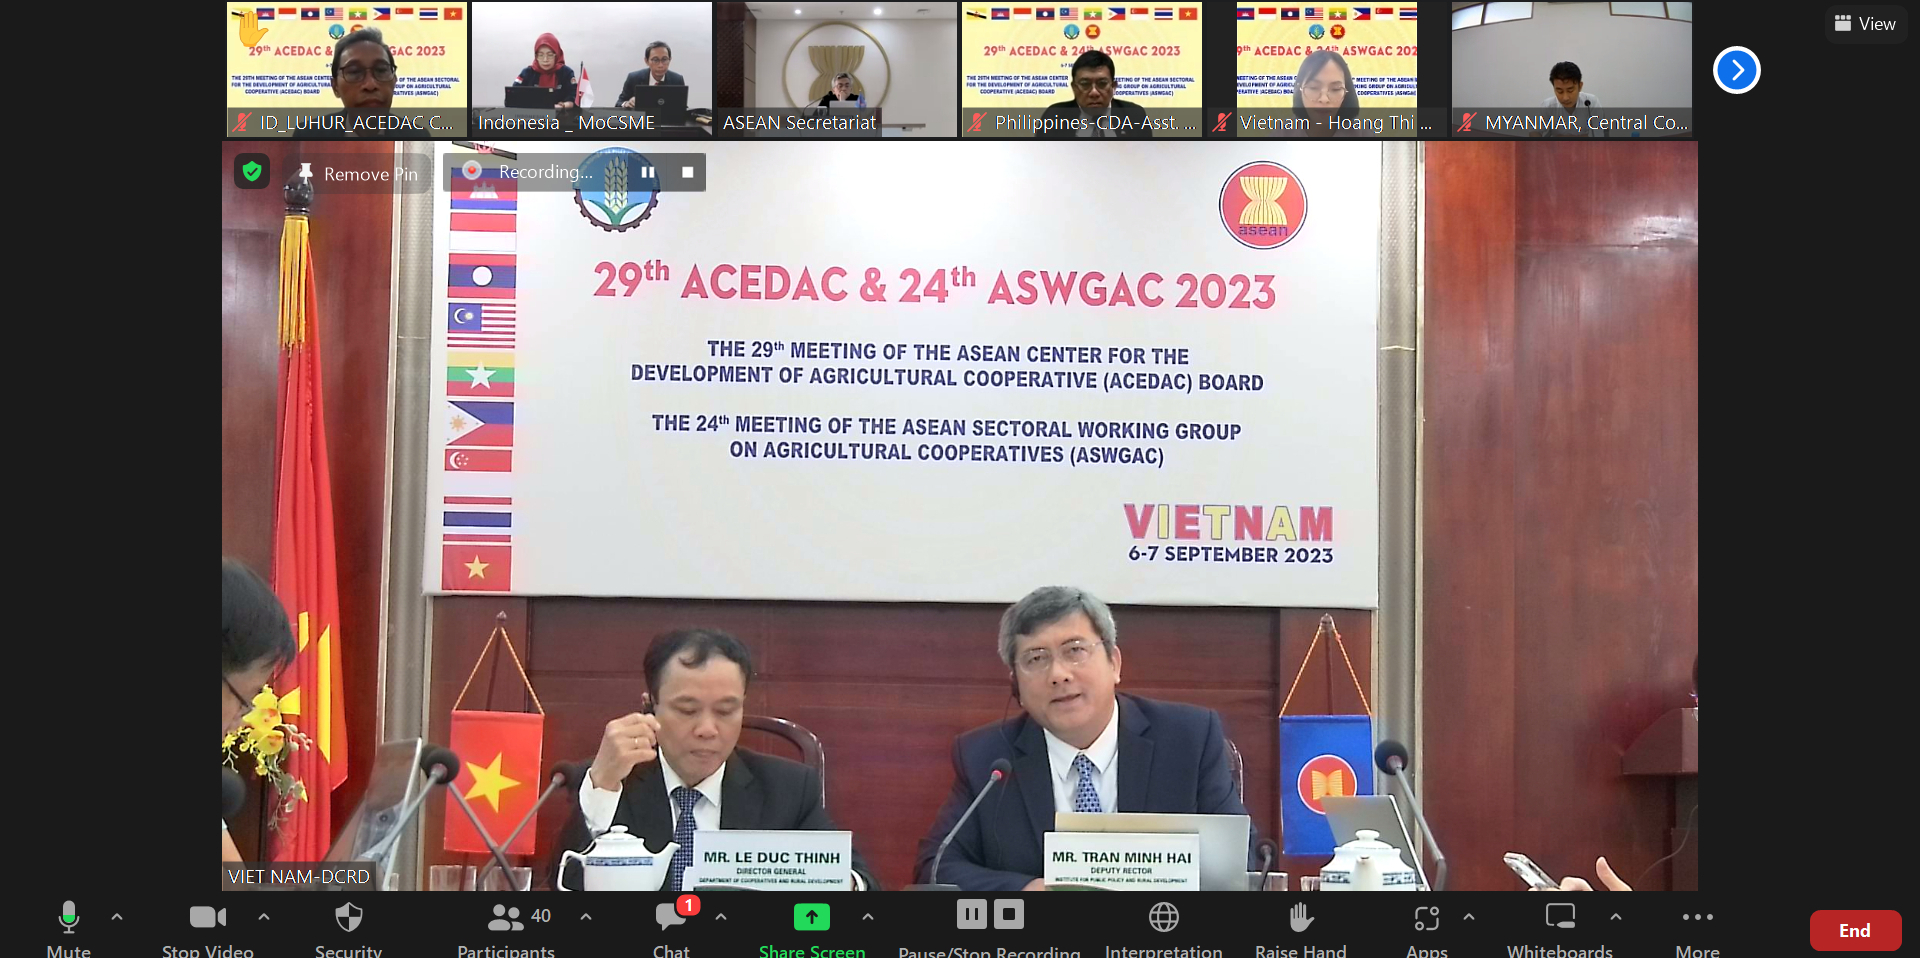 Representatives of the Ministry of Agriculture and Rural Development, Mr. Le Duc Thinh - Director of the Department of Economic Cooperation and Rural Development, and Mr. Tran Minh Hai - Vice Rector of the School of Public Policy and Rural Development chaired the 29th meeting of ASEAN Agricultural Cooperative Development Center (ACEDAC) and 24th ASEAN Sectoral Working Group on Agricultural Cooperatives (ASWGAC) on September 6 and 7.